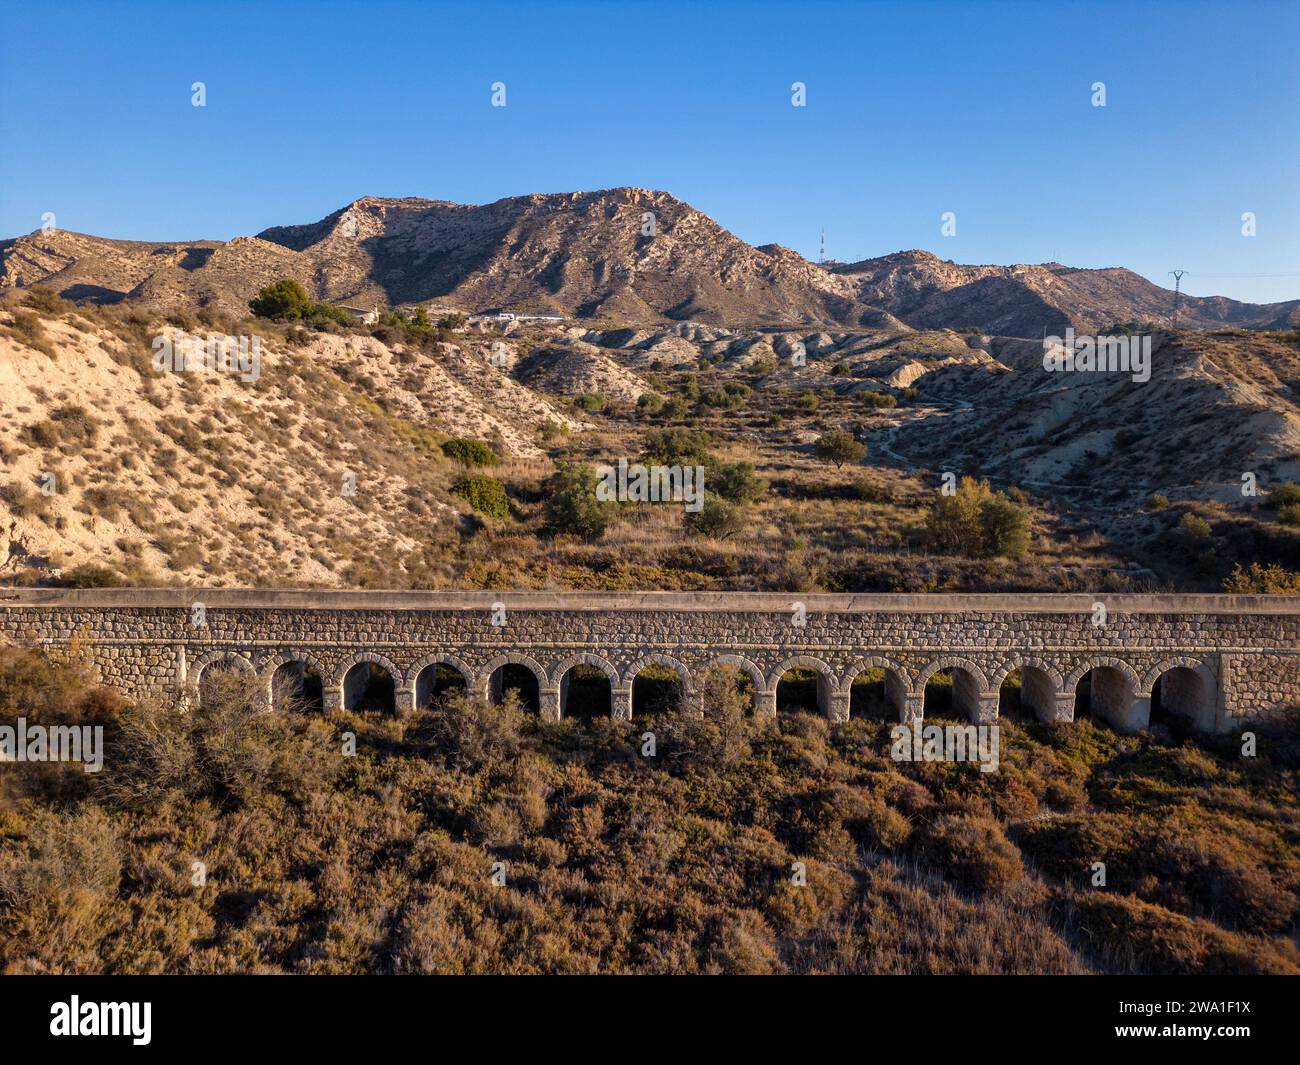 Old water aqueduct near the Elche reservoir, Alicante province, Costa Blanca, Spain - stock photo Stock Photo